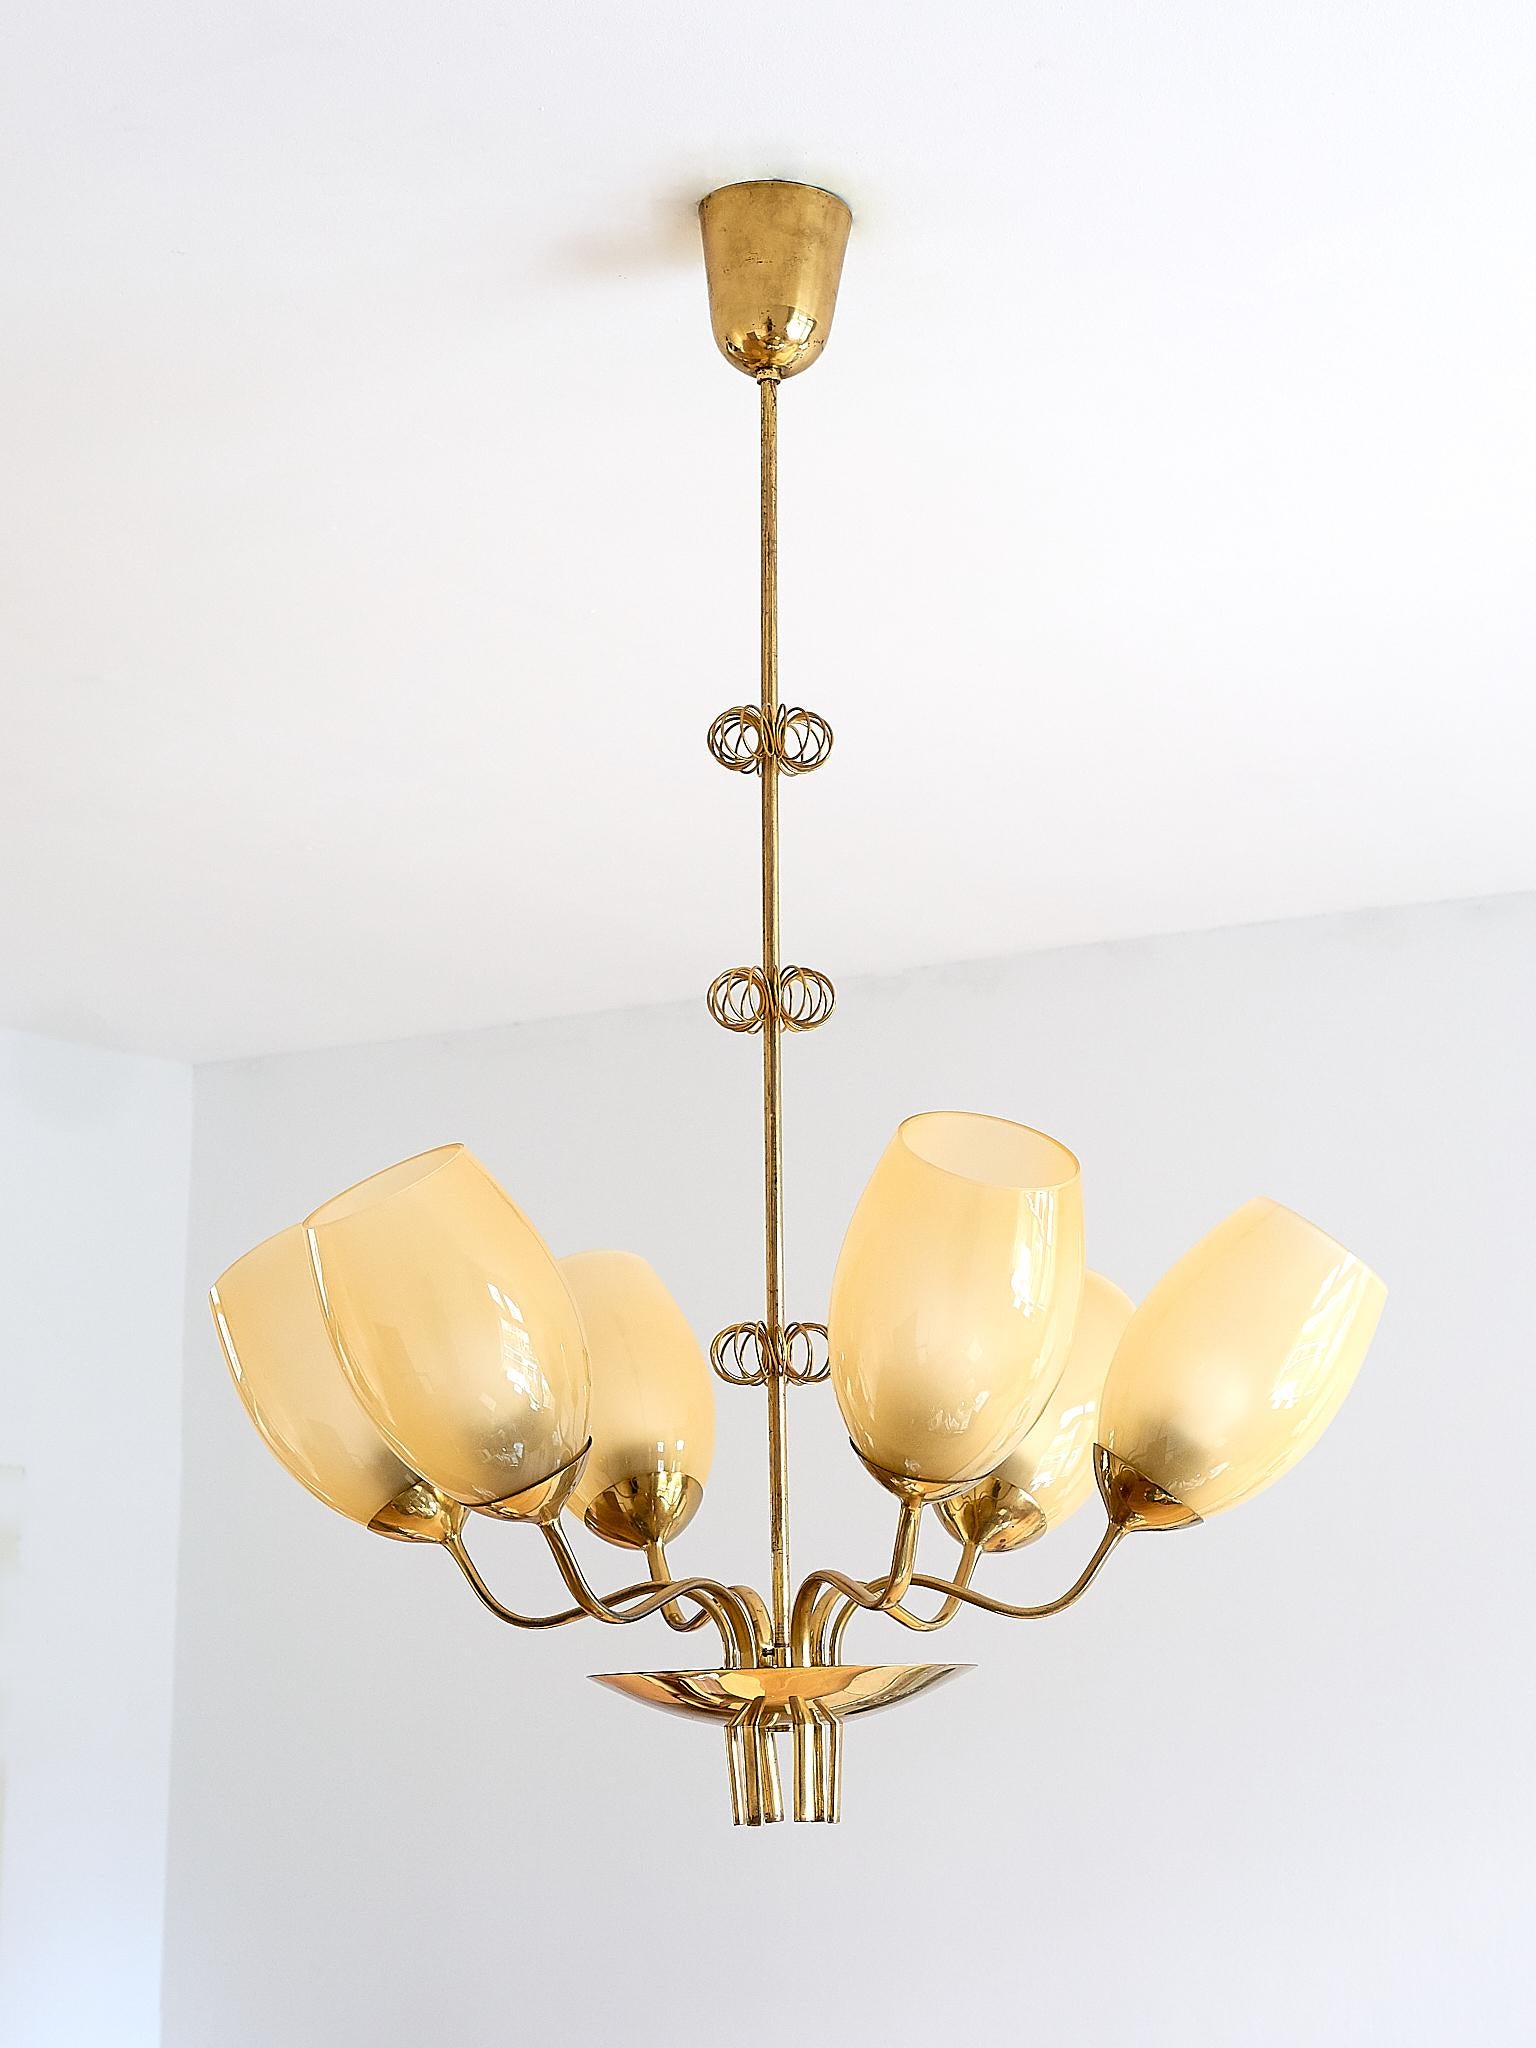 This six-glass chandelier was designed by Paavo Tynell and produced by Taito Oy in Finland in 1949. Paavo Tynell was responsible for designing the lighting for the hospital in Kuopio, which can be viewed in the sketches from the Taito archives (as